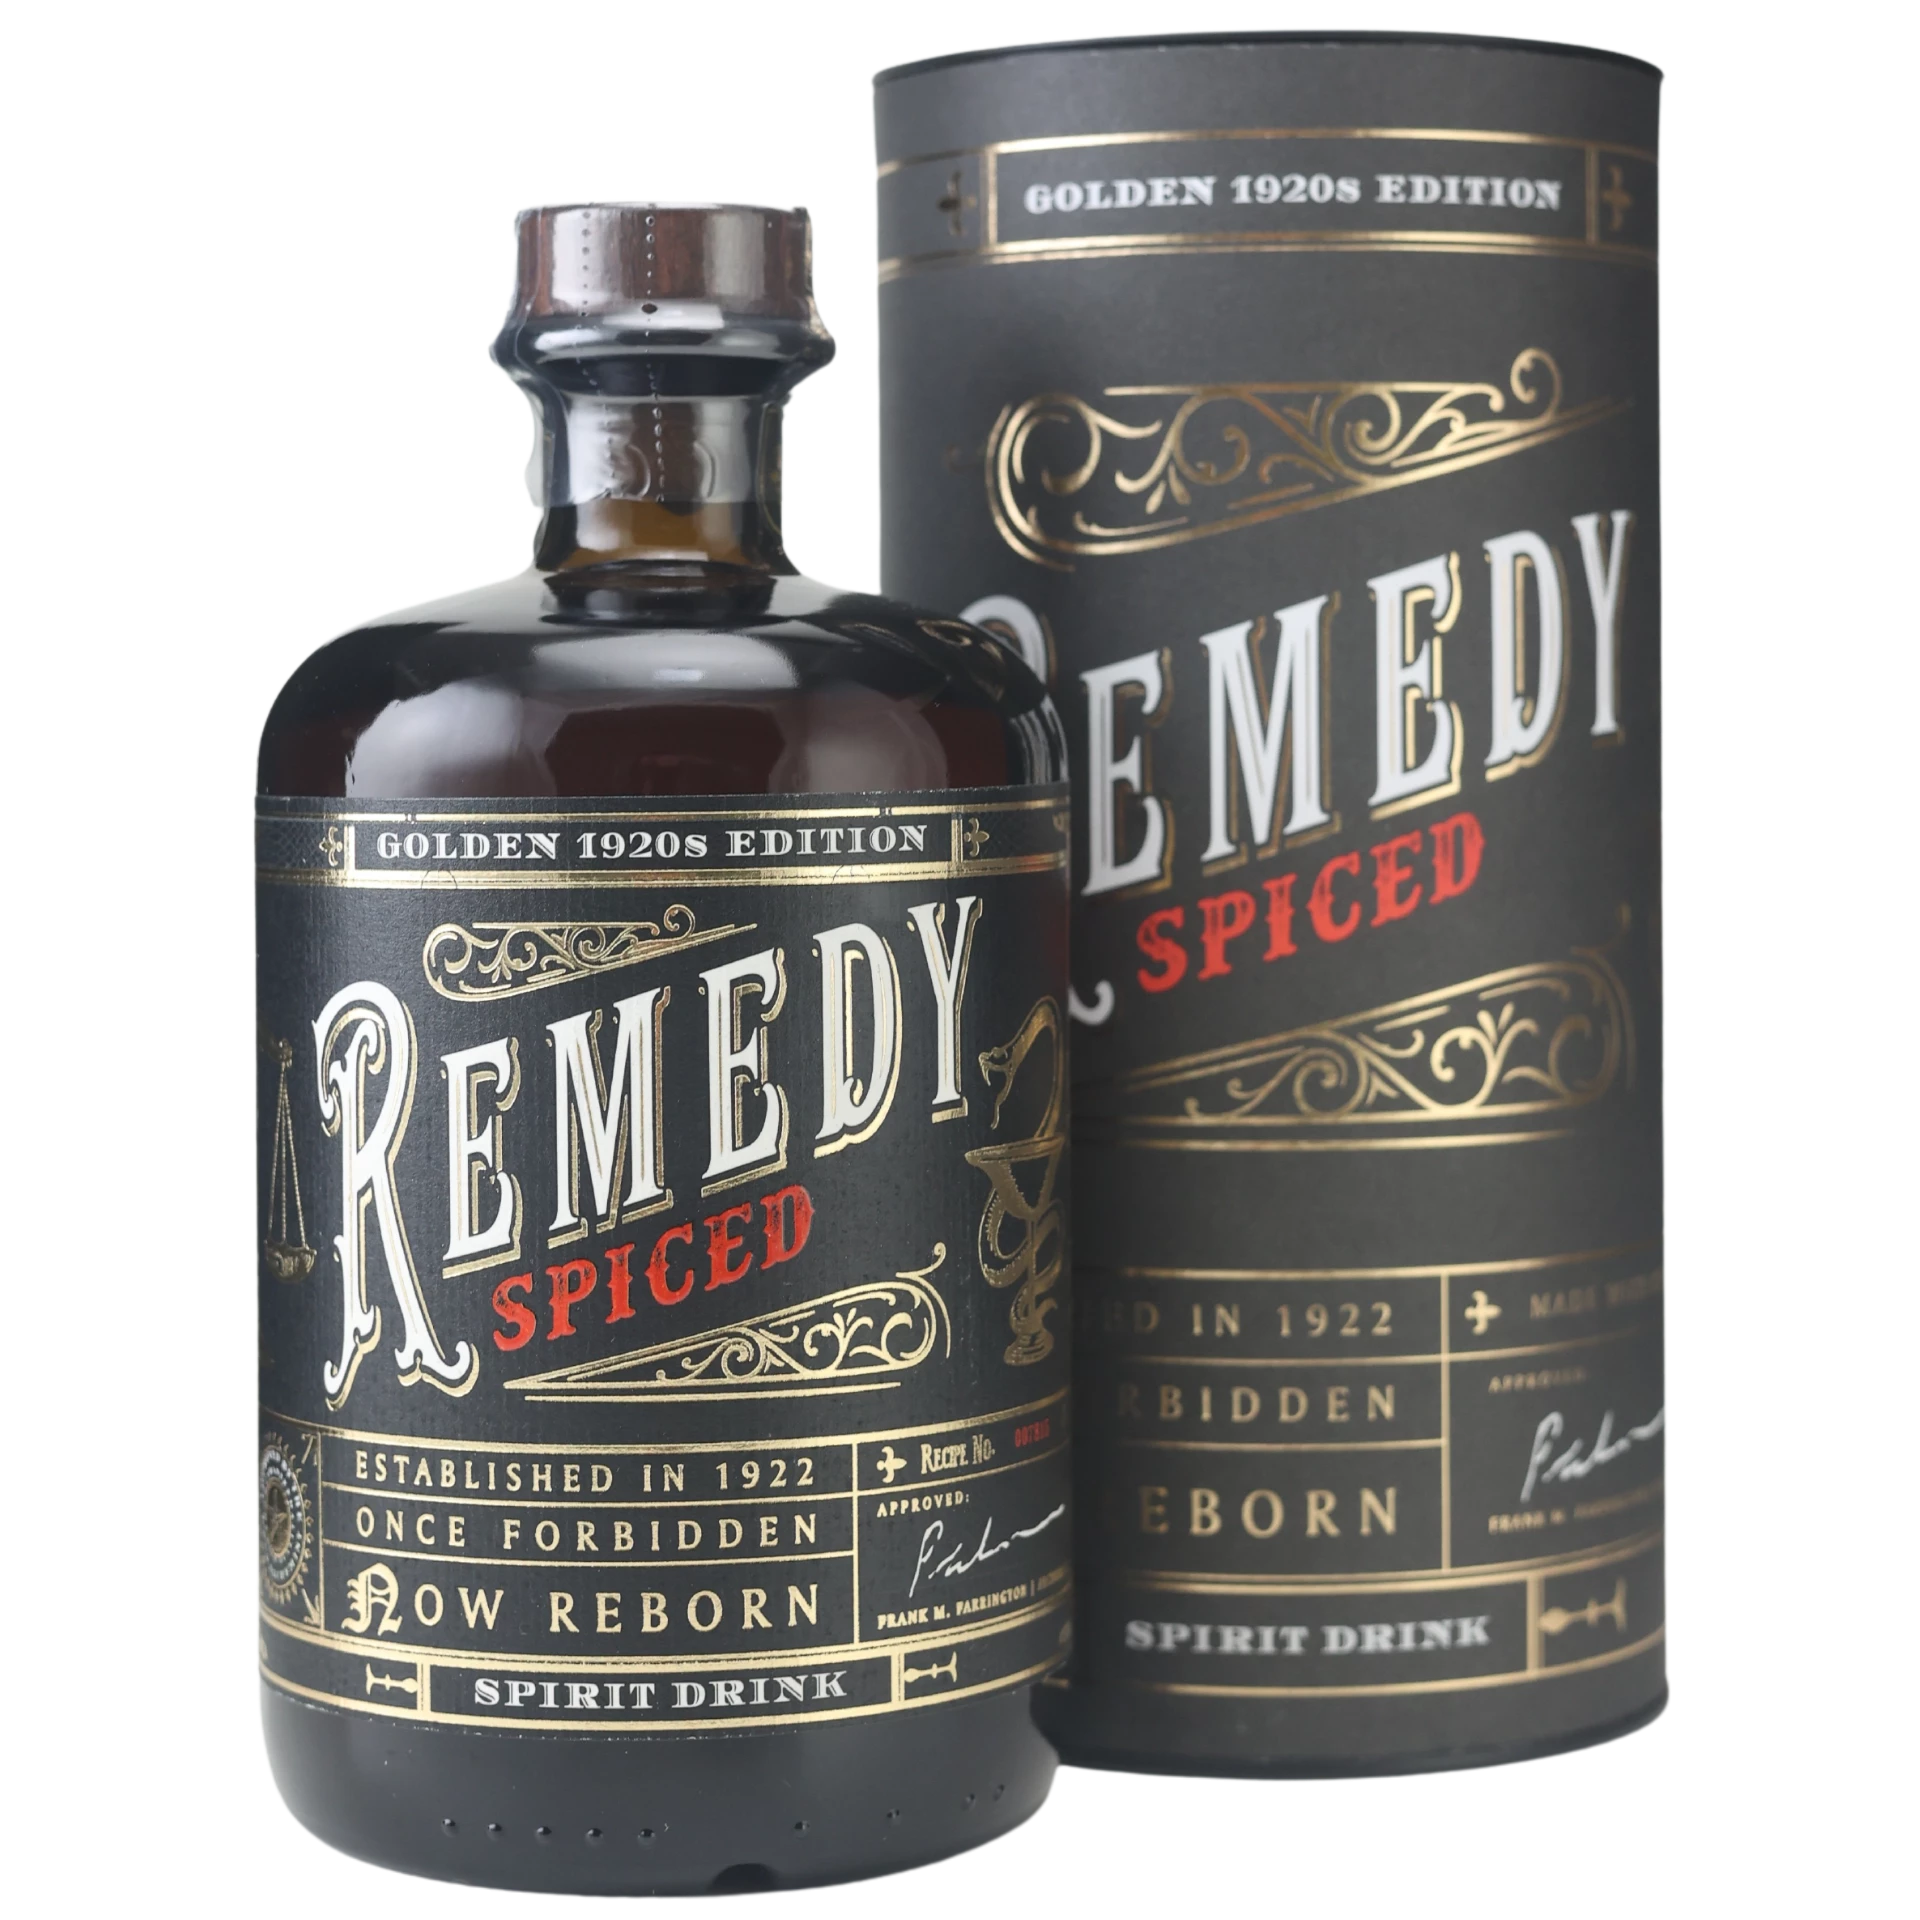 Remedy Spiced Golden 20´s Edition (Rum Basis) 41,5% 0,7l